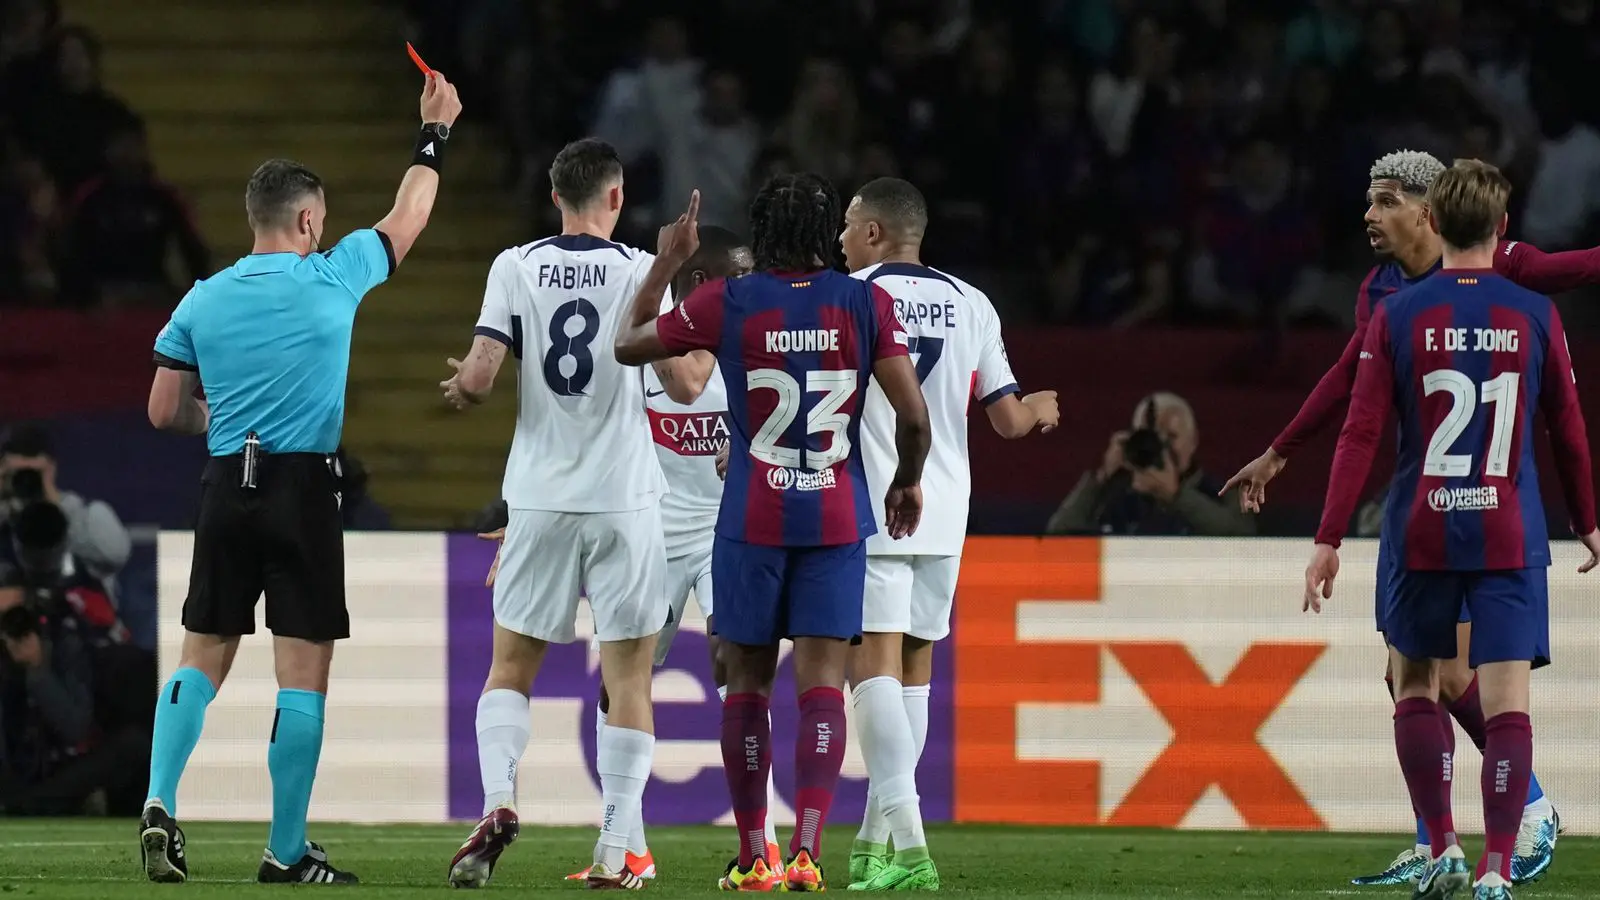 UCL: Details of Mbappe's clash with Barcelona players after PSG win